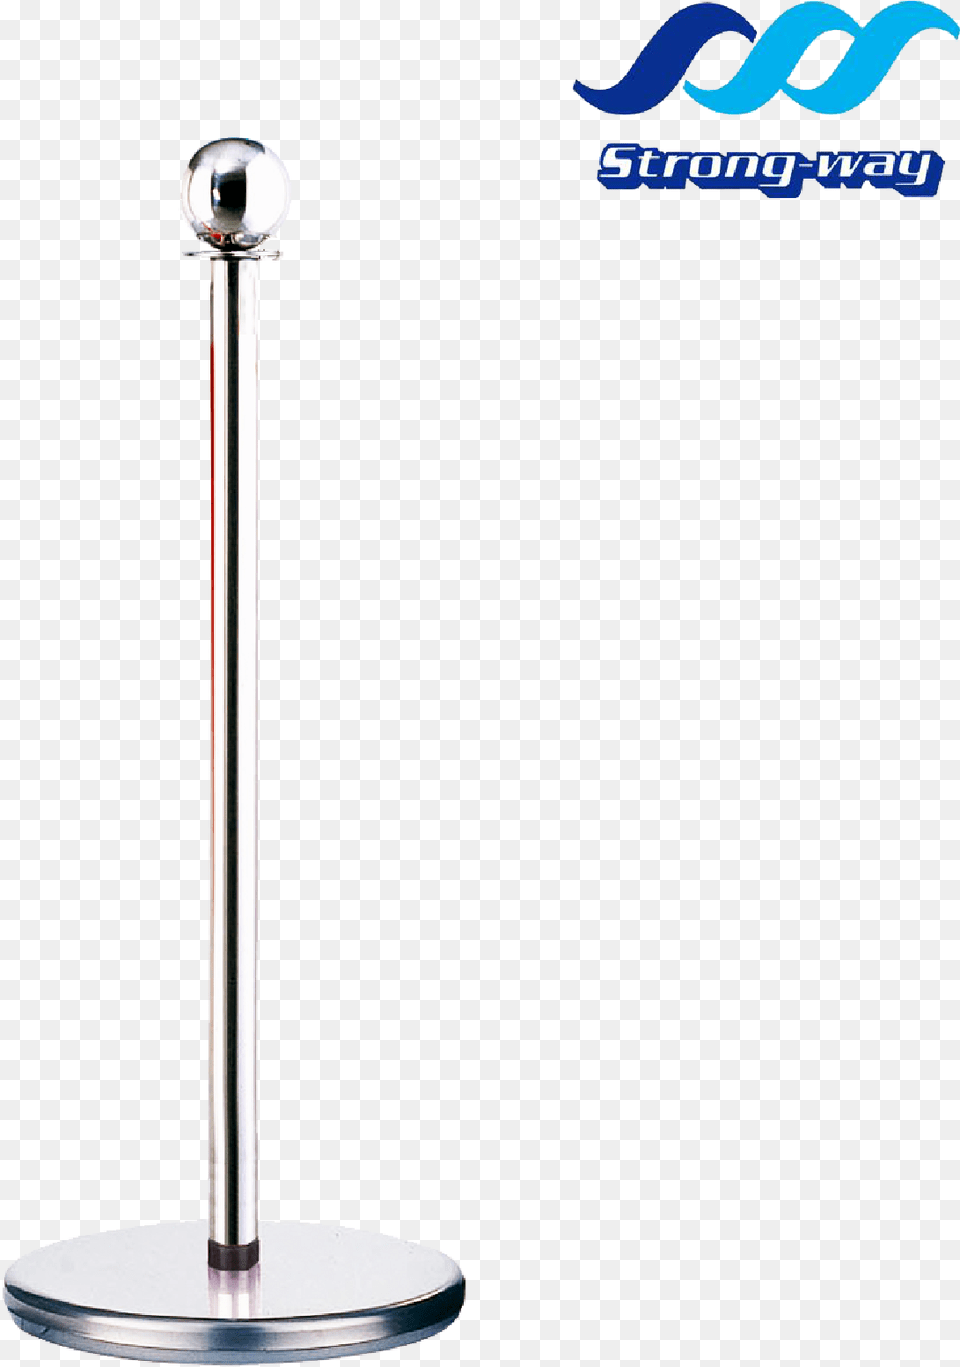 Proimagesother Barrierr2s 01 Glass, Electrical Device, Microphone, Furniture, Mace Club Free Png Download